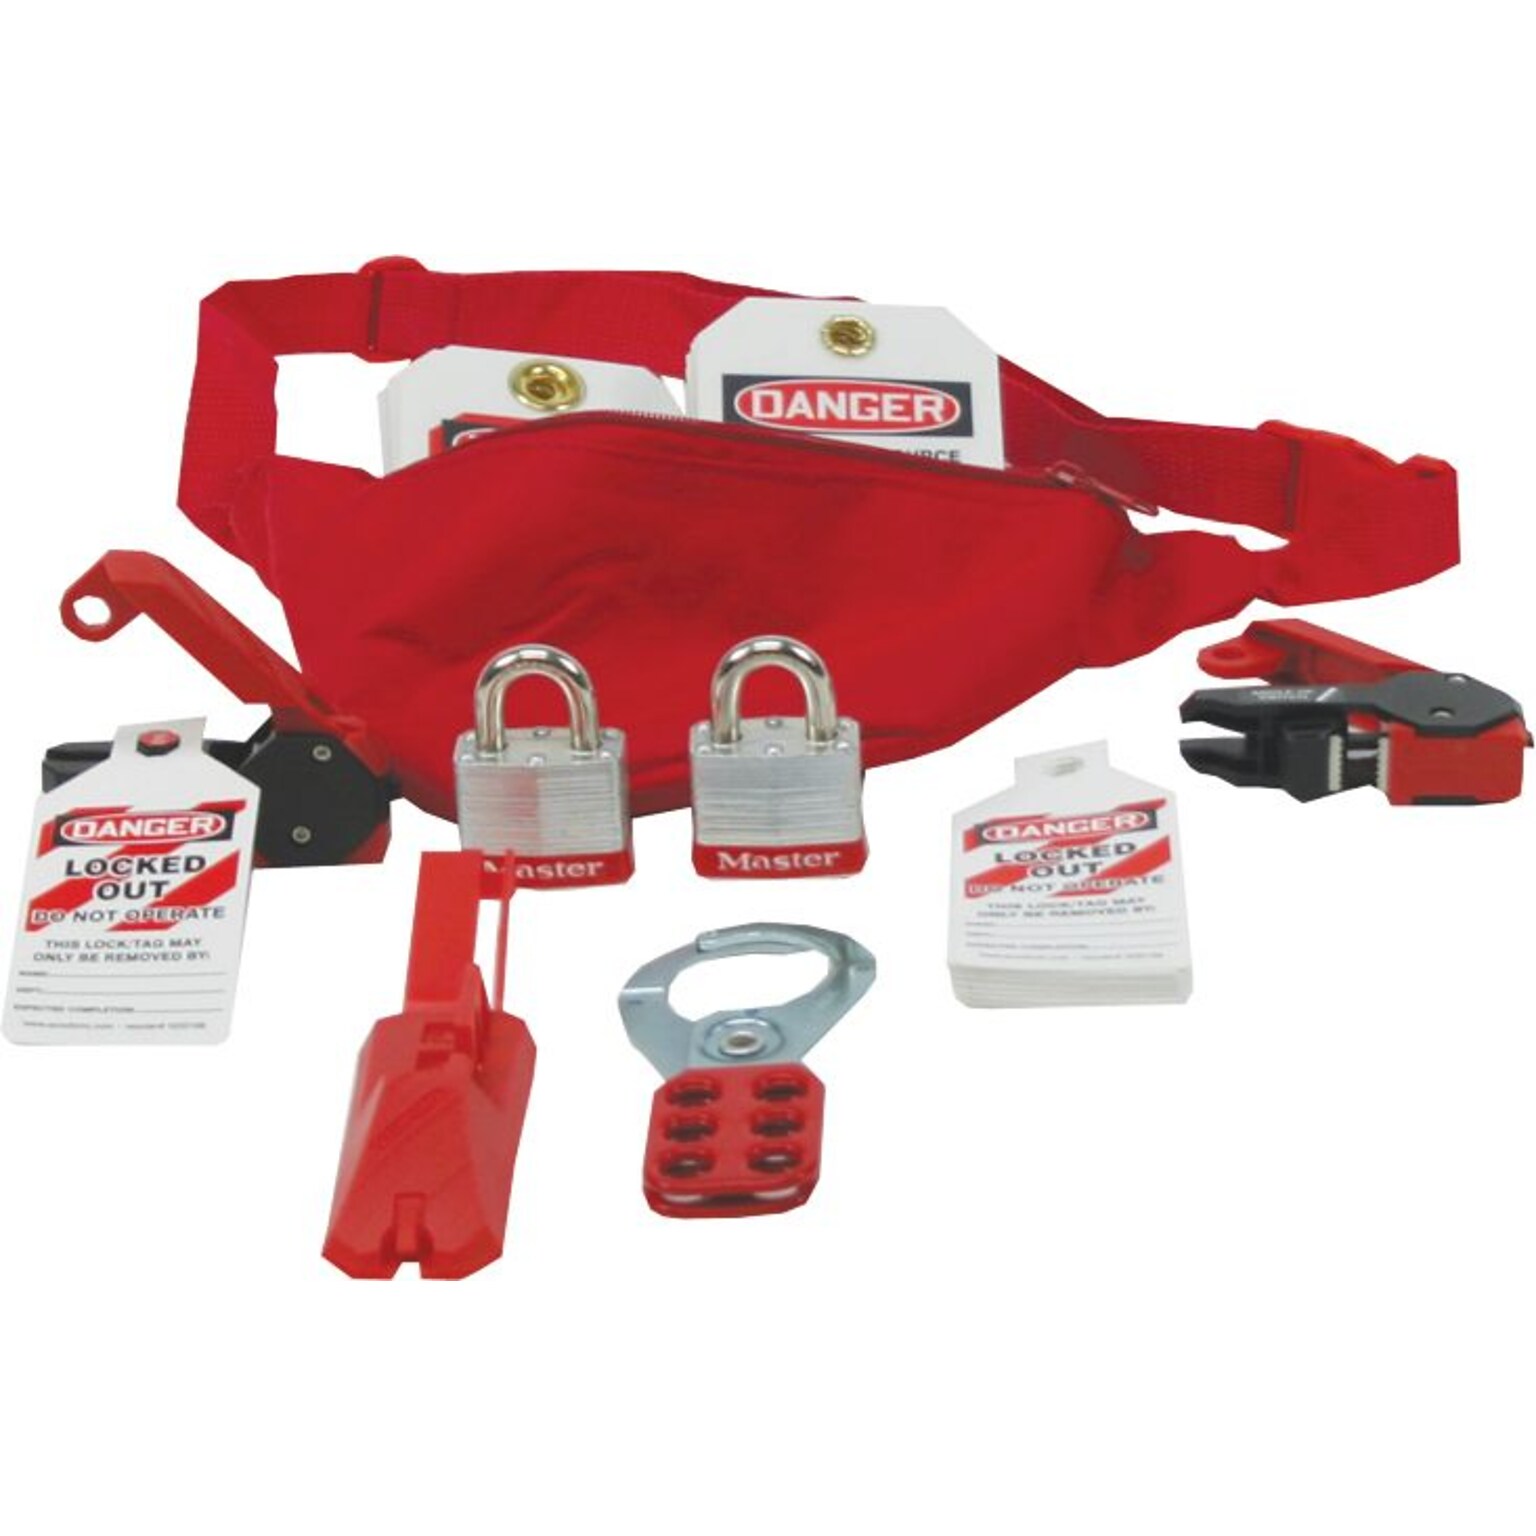 Accuform Lockout/Tagout Pouch Kit With Front Zipper, Adjustable Waist Strap, Red (KSK115)